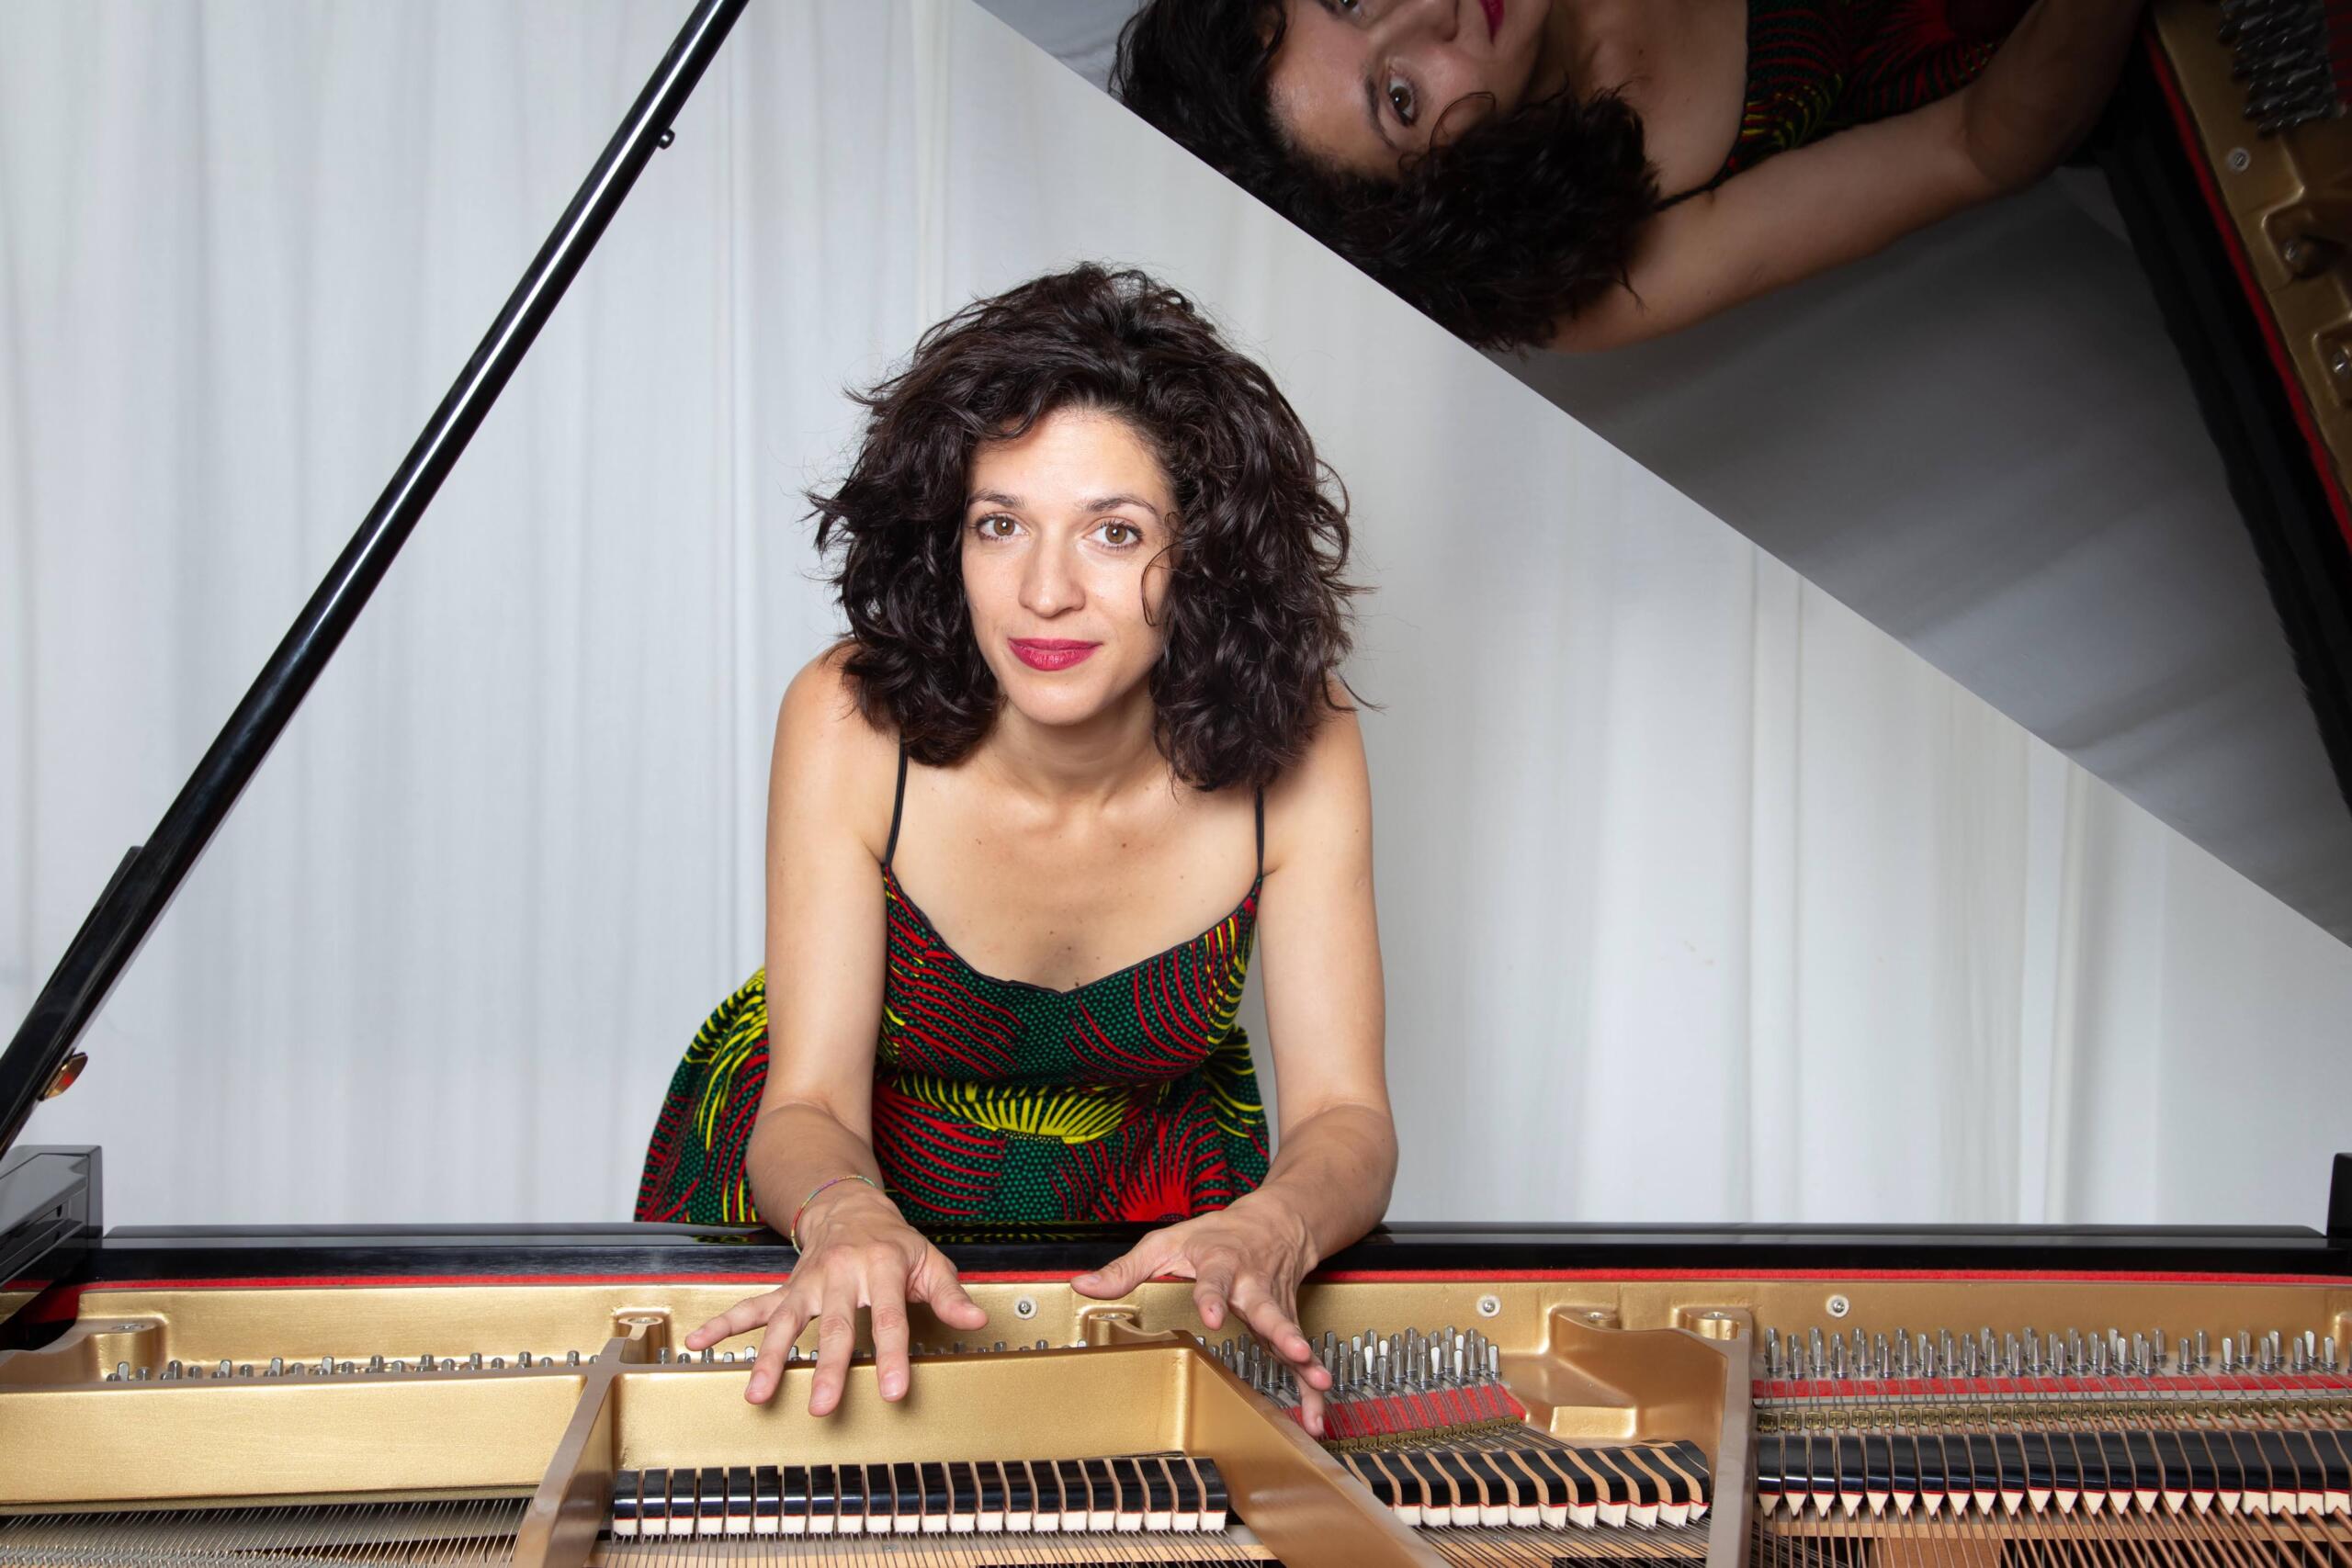 Portrait photograph of Cuban pianist Yami CruzMontero. She stands behind a grand piano in a colourful dress and smiles at the camera.